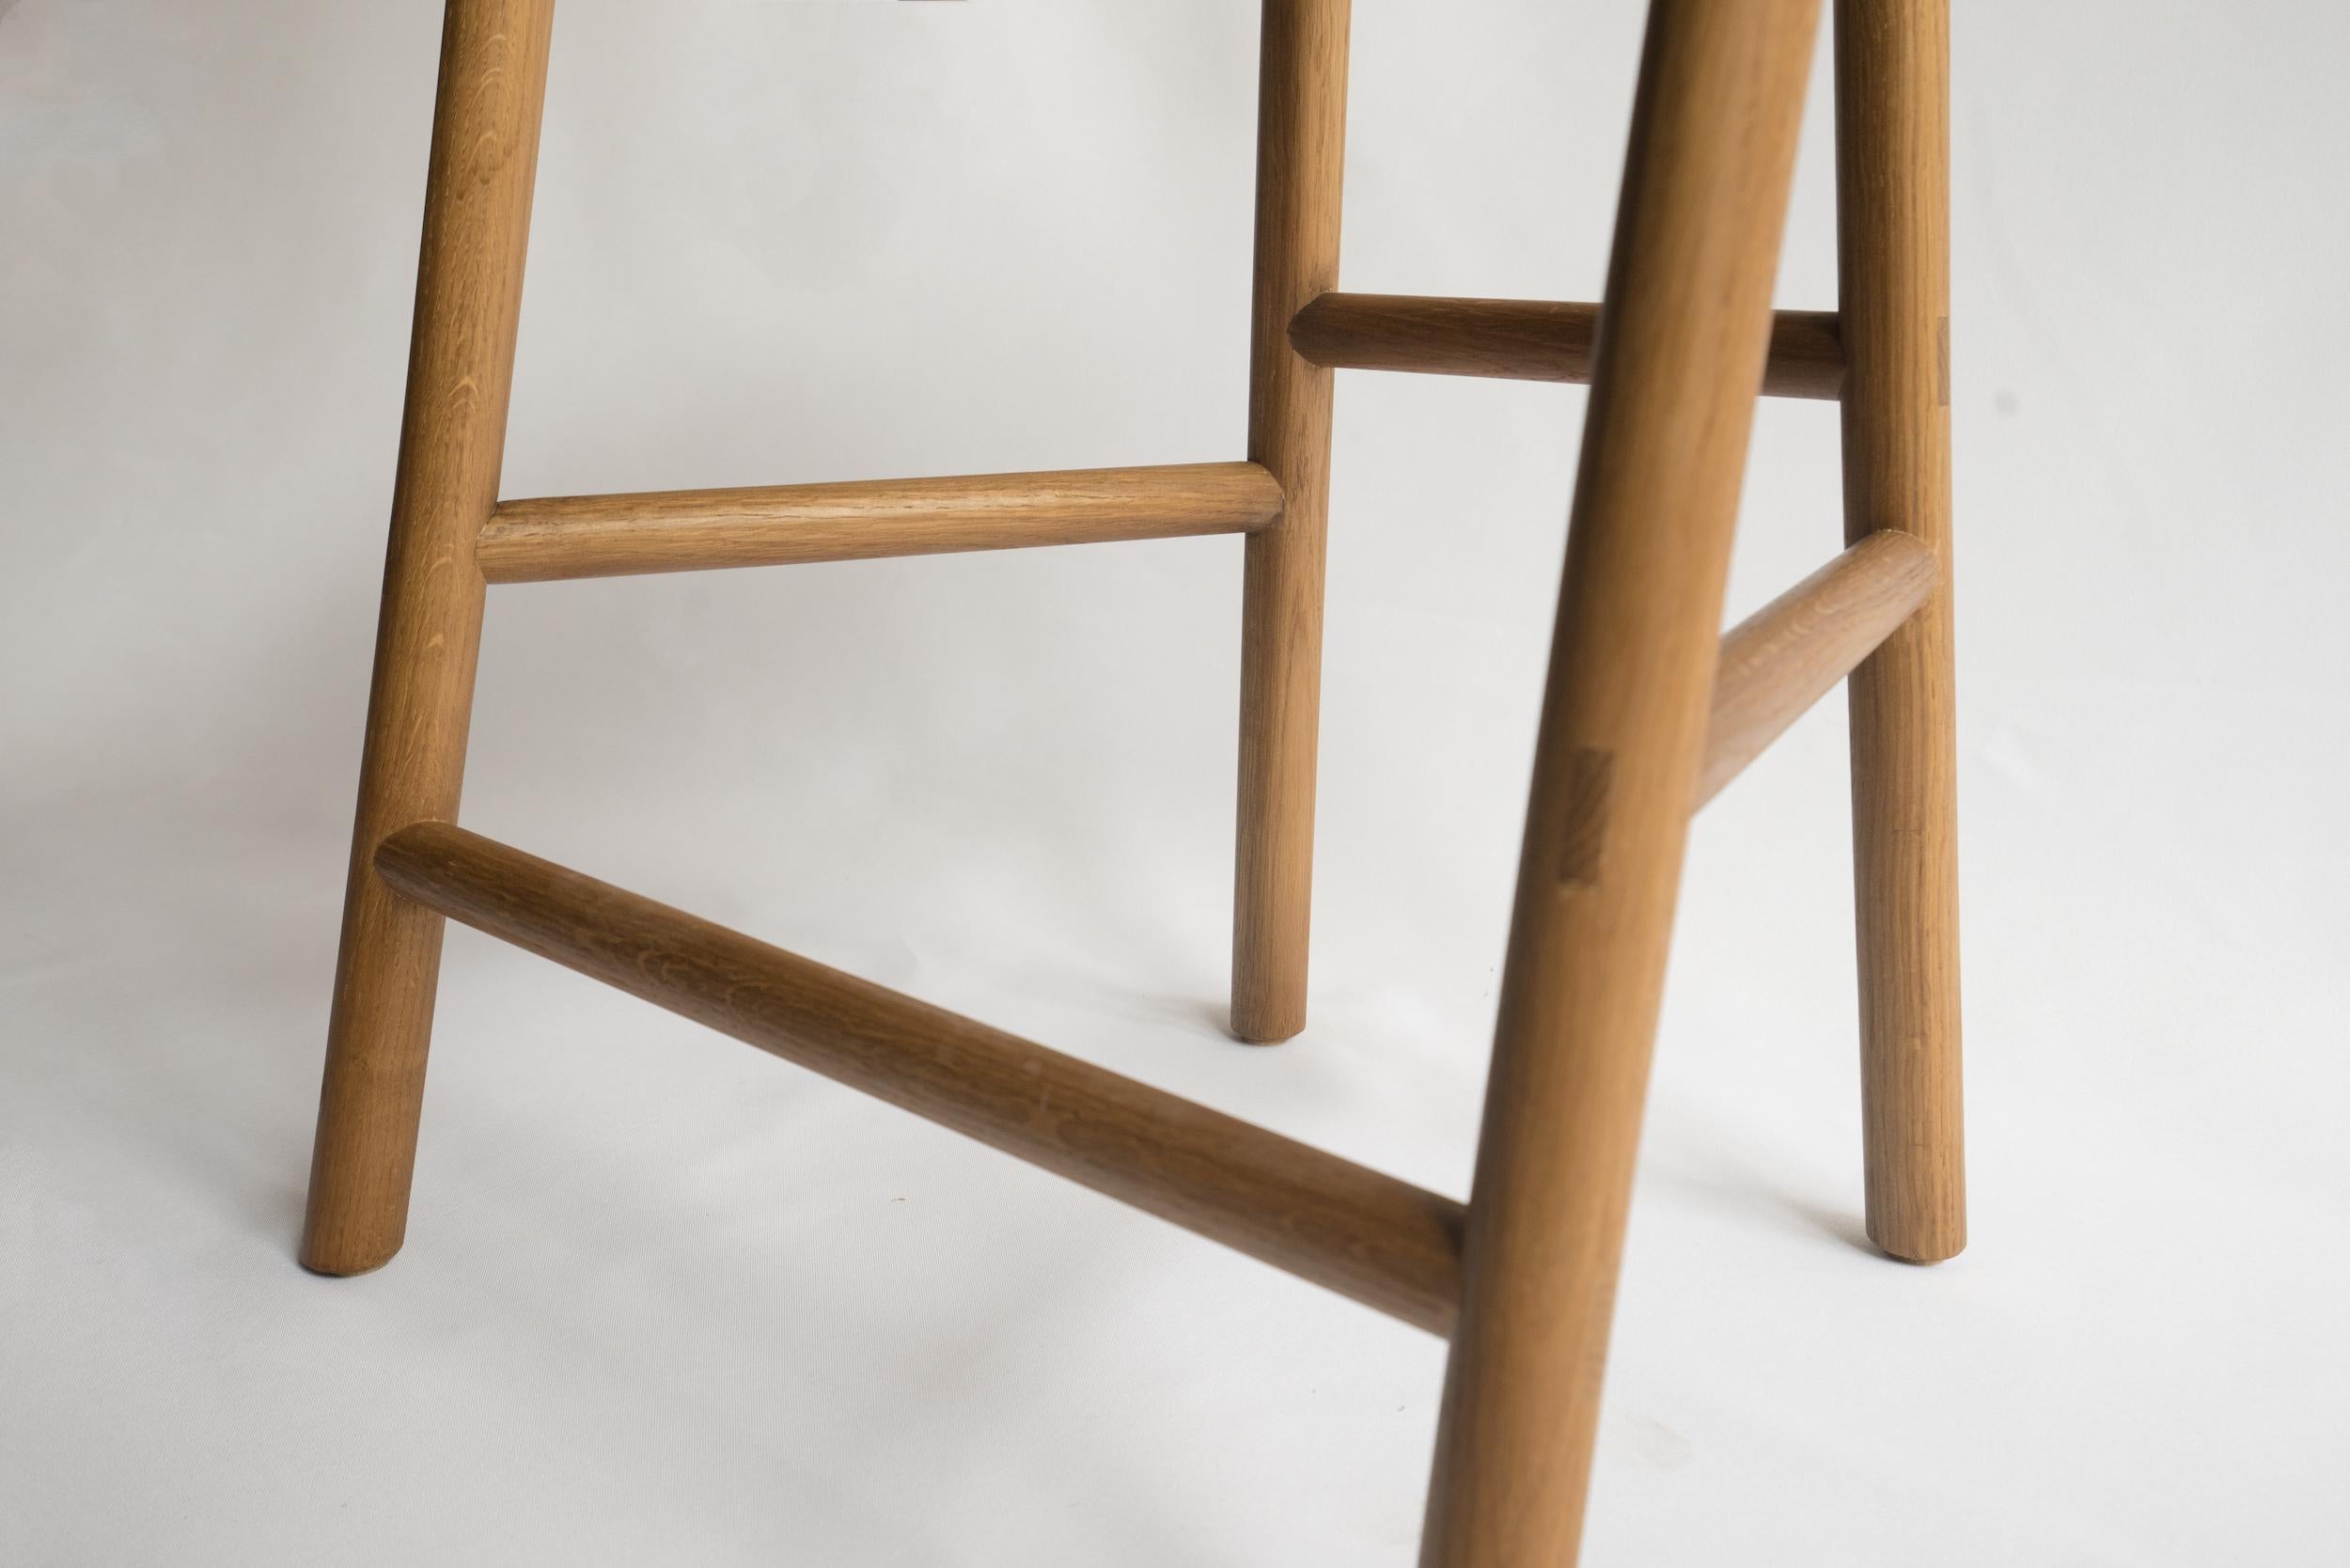 Chinese Moon Stool by Sun at Six, Sienna, Minimalist Counter Stool in Oak wood